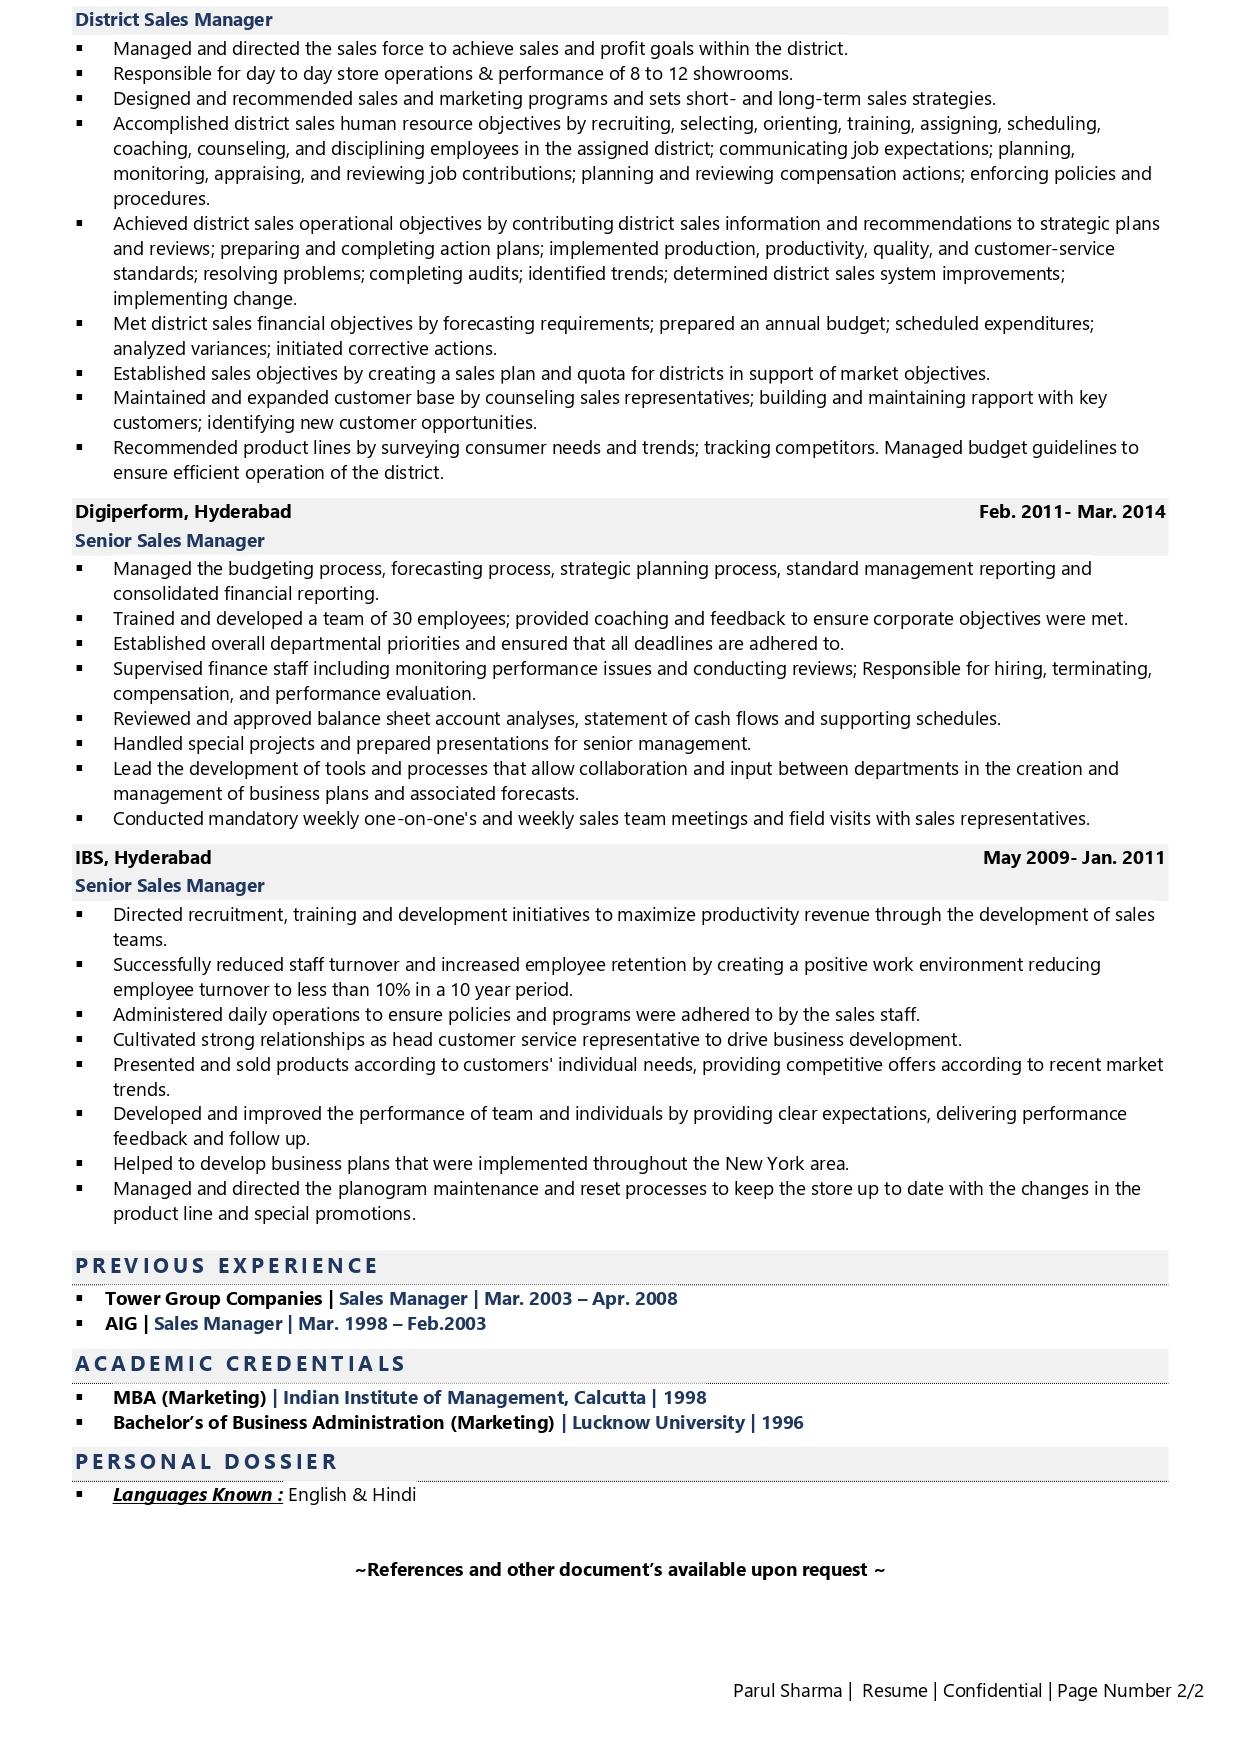 National Sales Director - Resume Example & Template